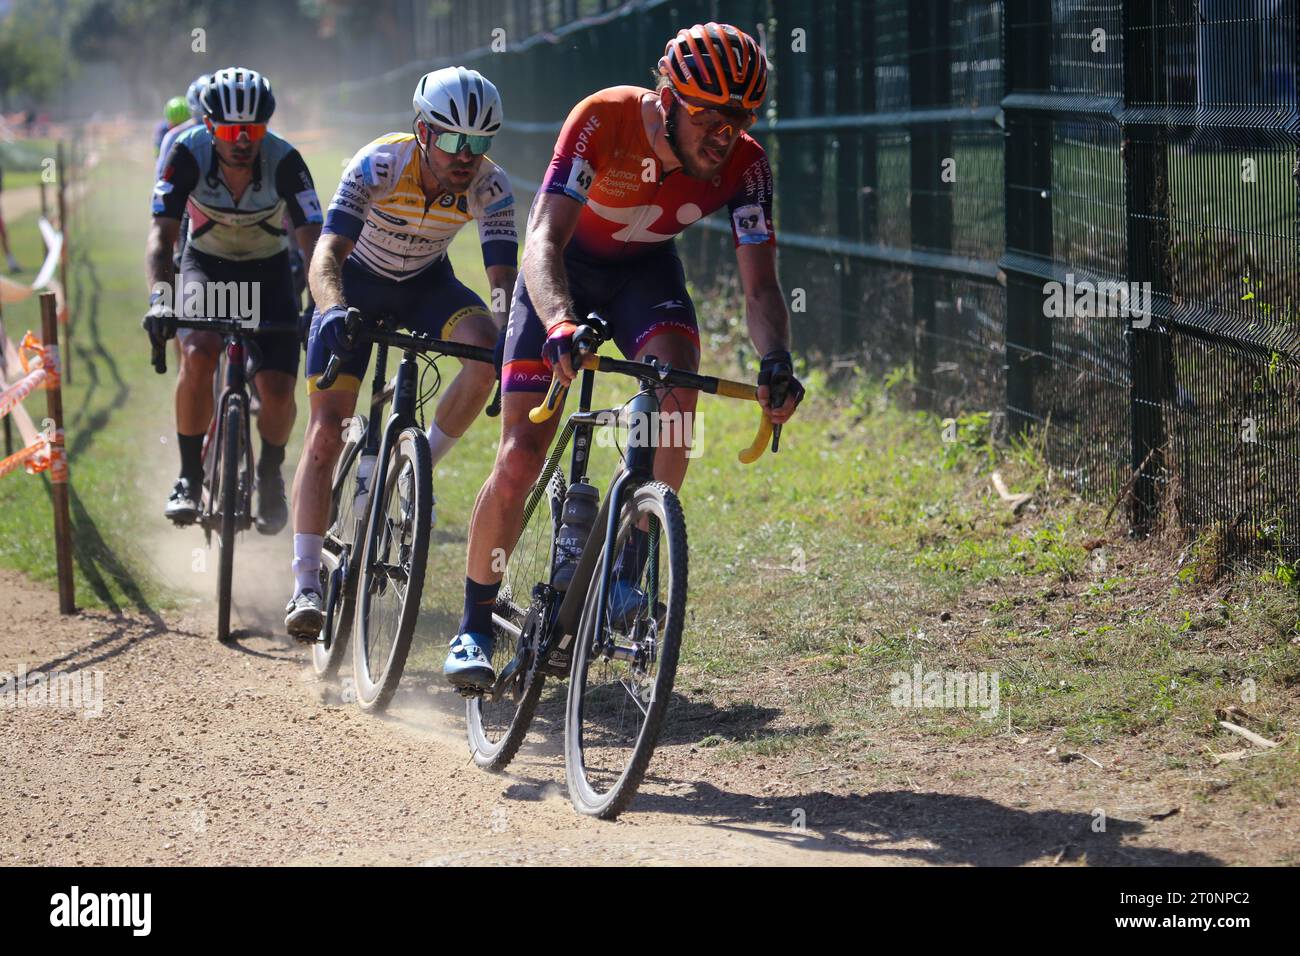 Pontevedra, Spain, October 7th, 2023: The cyclist, Gage Hecht (49, R) leads a group during the men's elite test of the Gran Premio Cidade de Pontevedra 2023, on October 7, 2023, in Pontevedra, Spain. (Photo by Alberto Brevers / Pacific Press/Sipa USA) Stock Photo